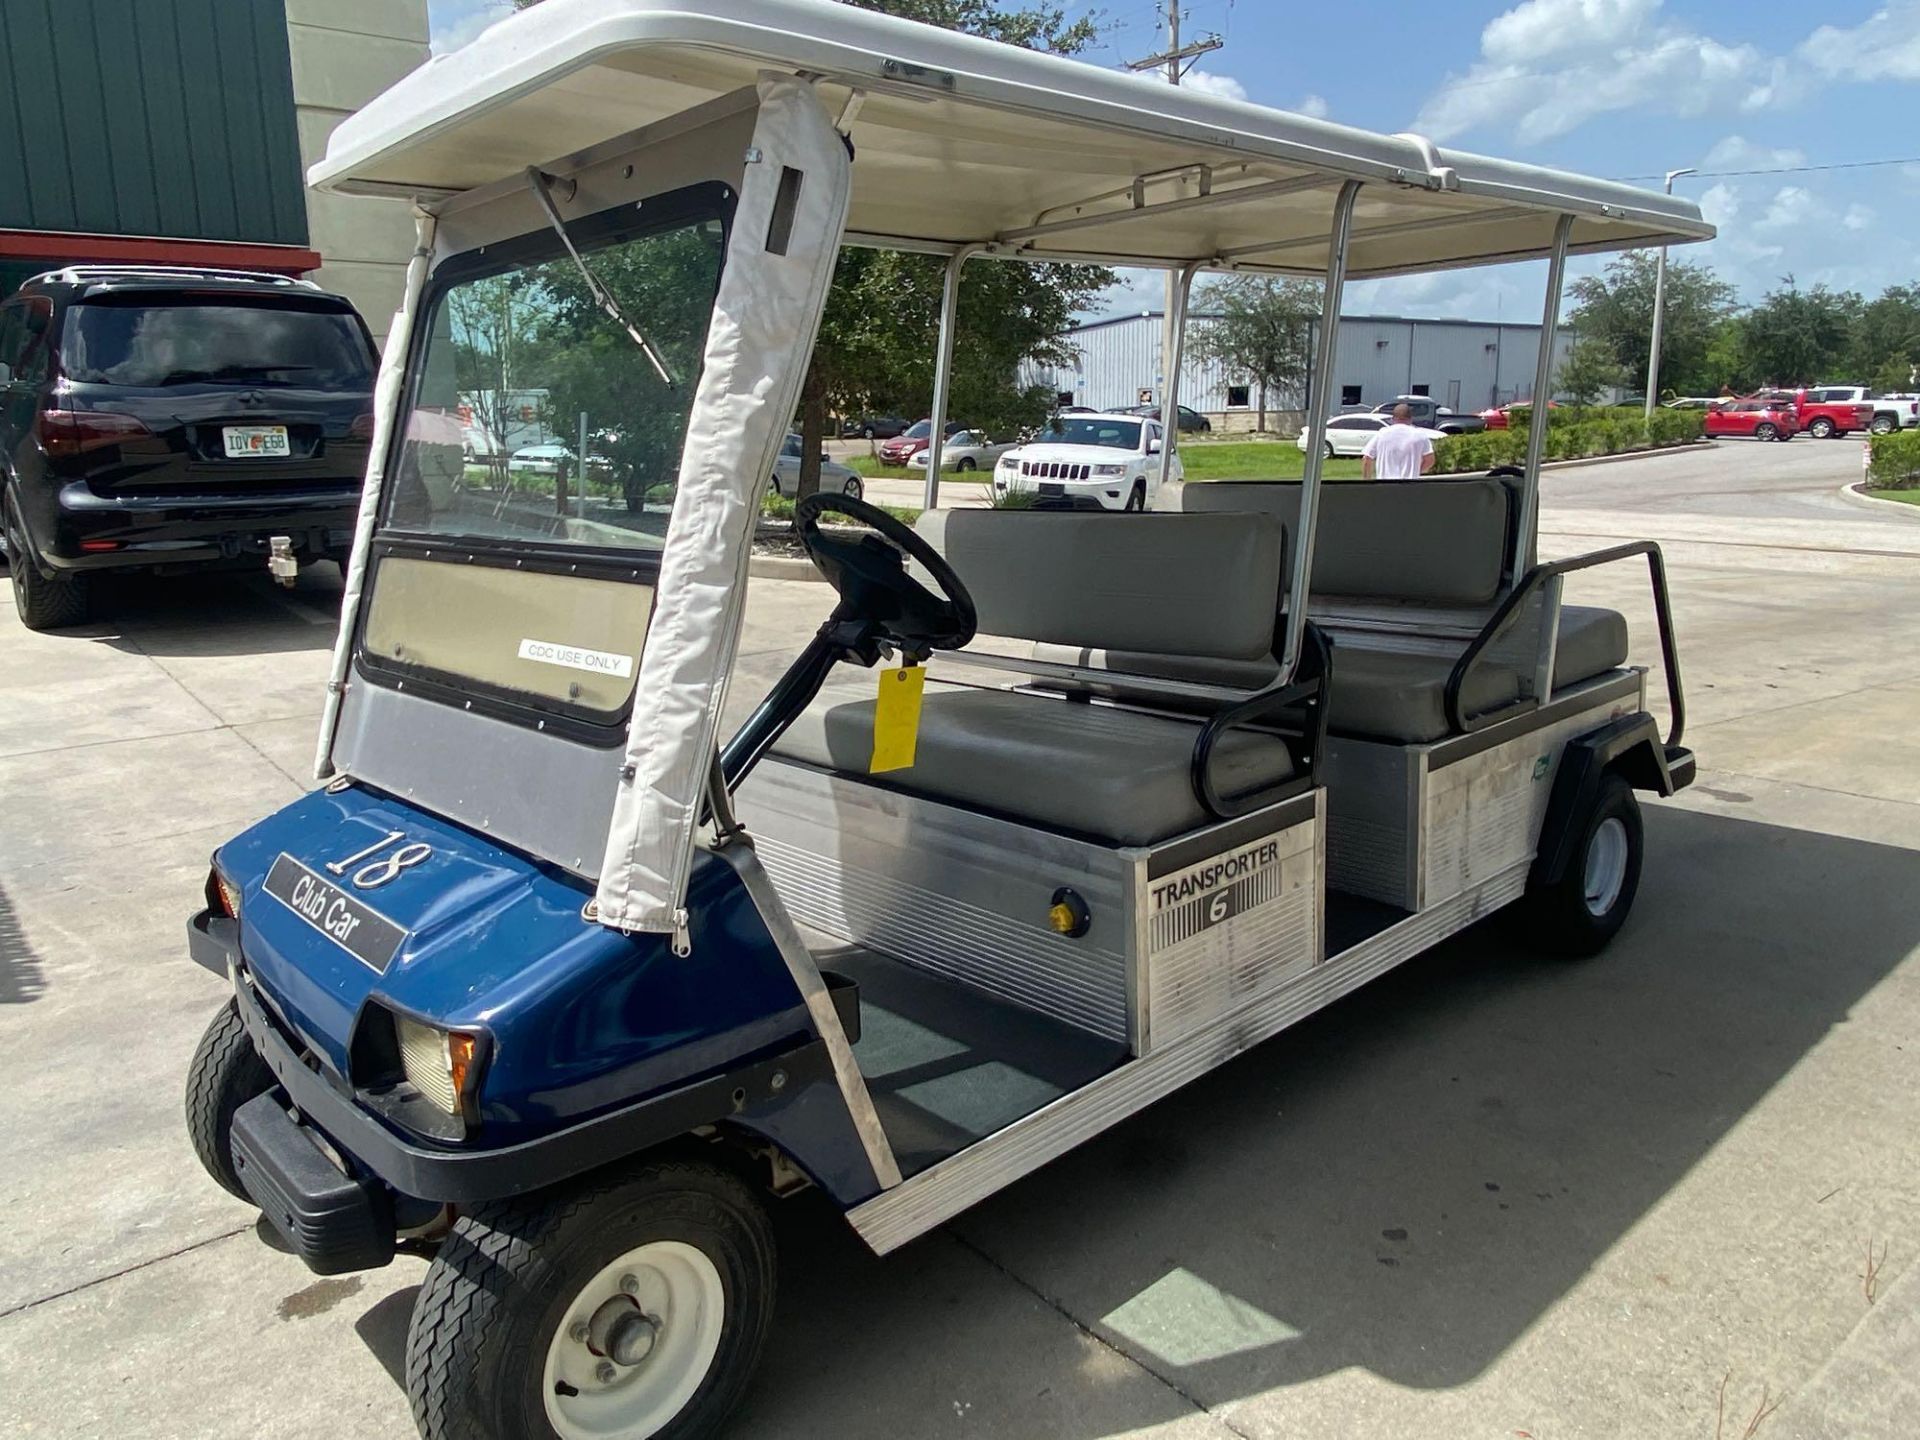 CLUB CAR TRANSPORTER 6 48V ELECTRIC GOLF CART, BUILT IN CHARGER, RUNS AND OPERATES - Image 2 of 9